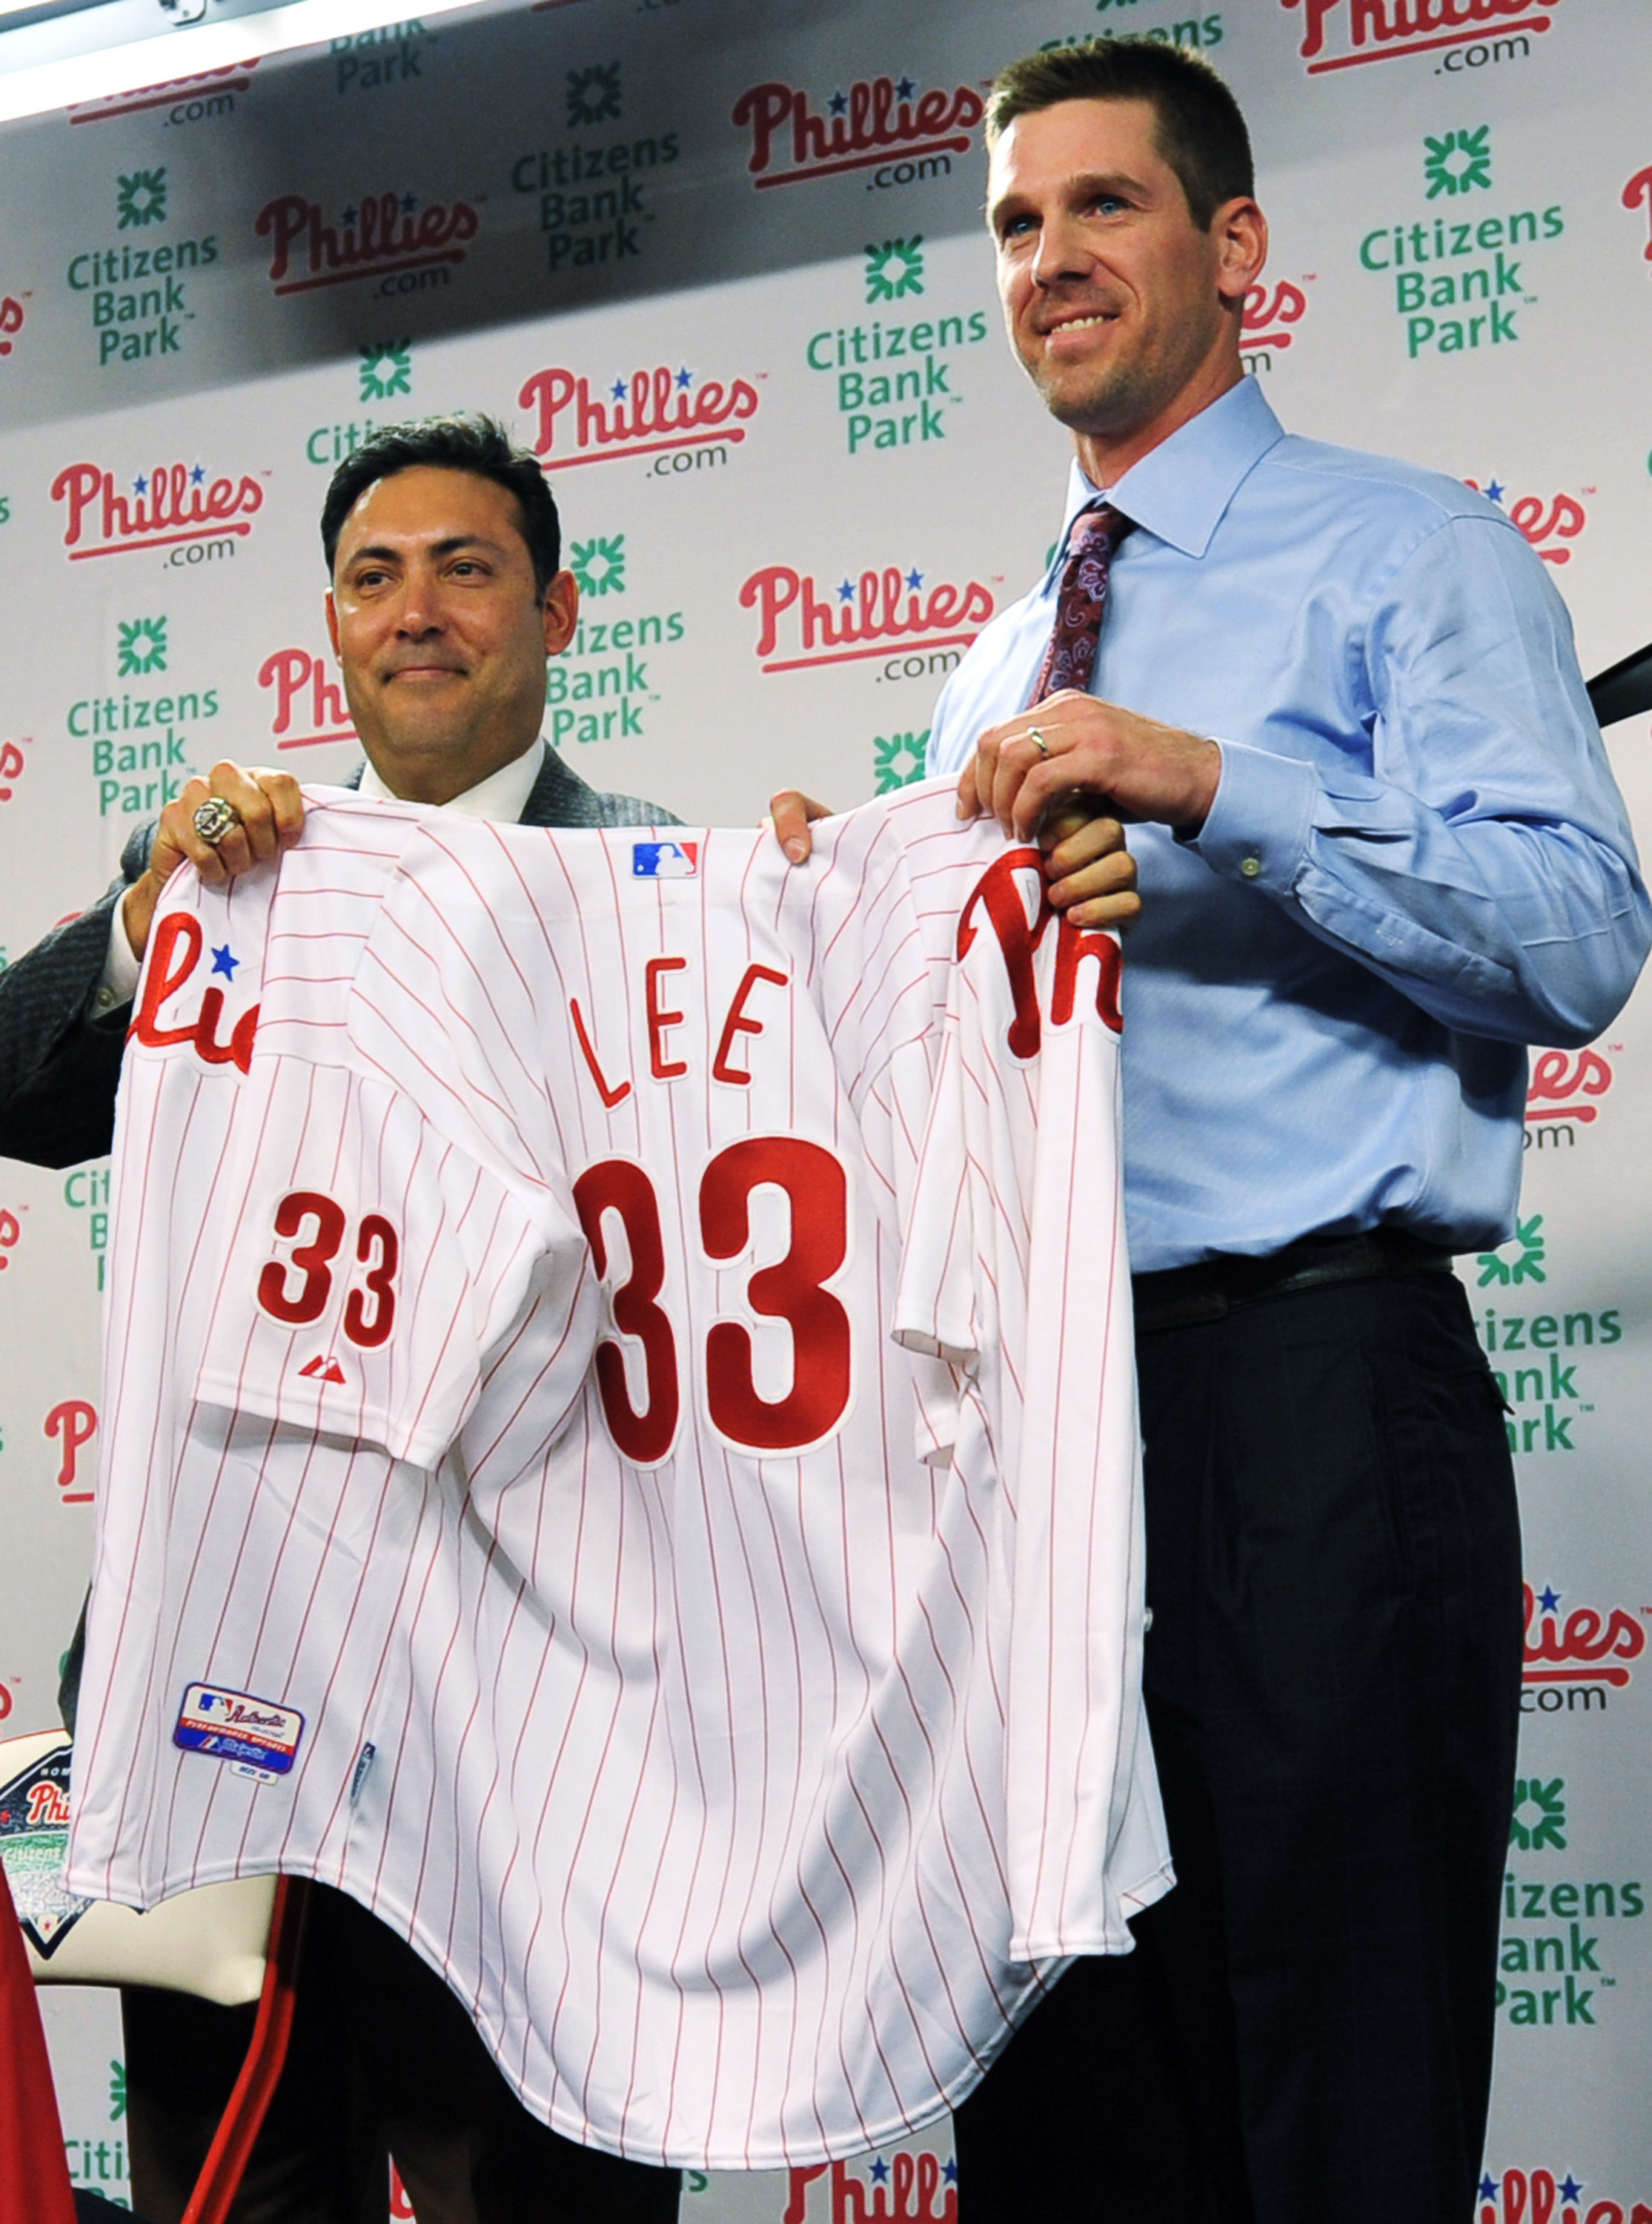 Cliff Lee will help the Phillies return to the World Series.